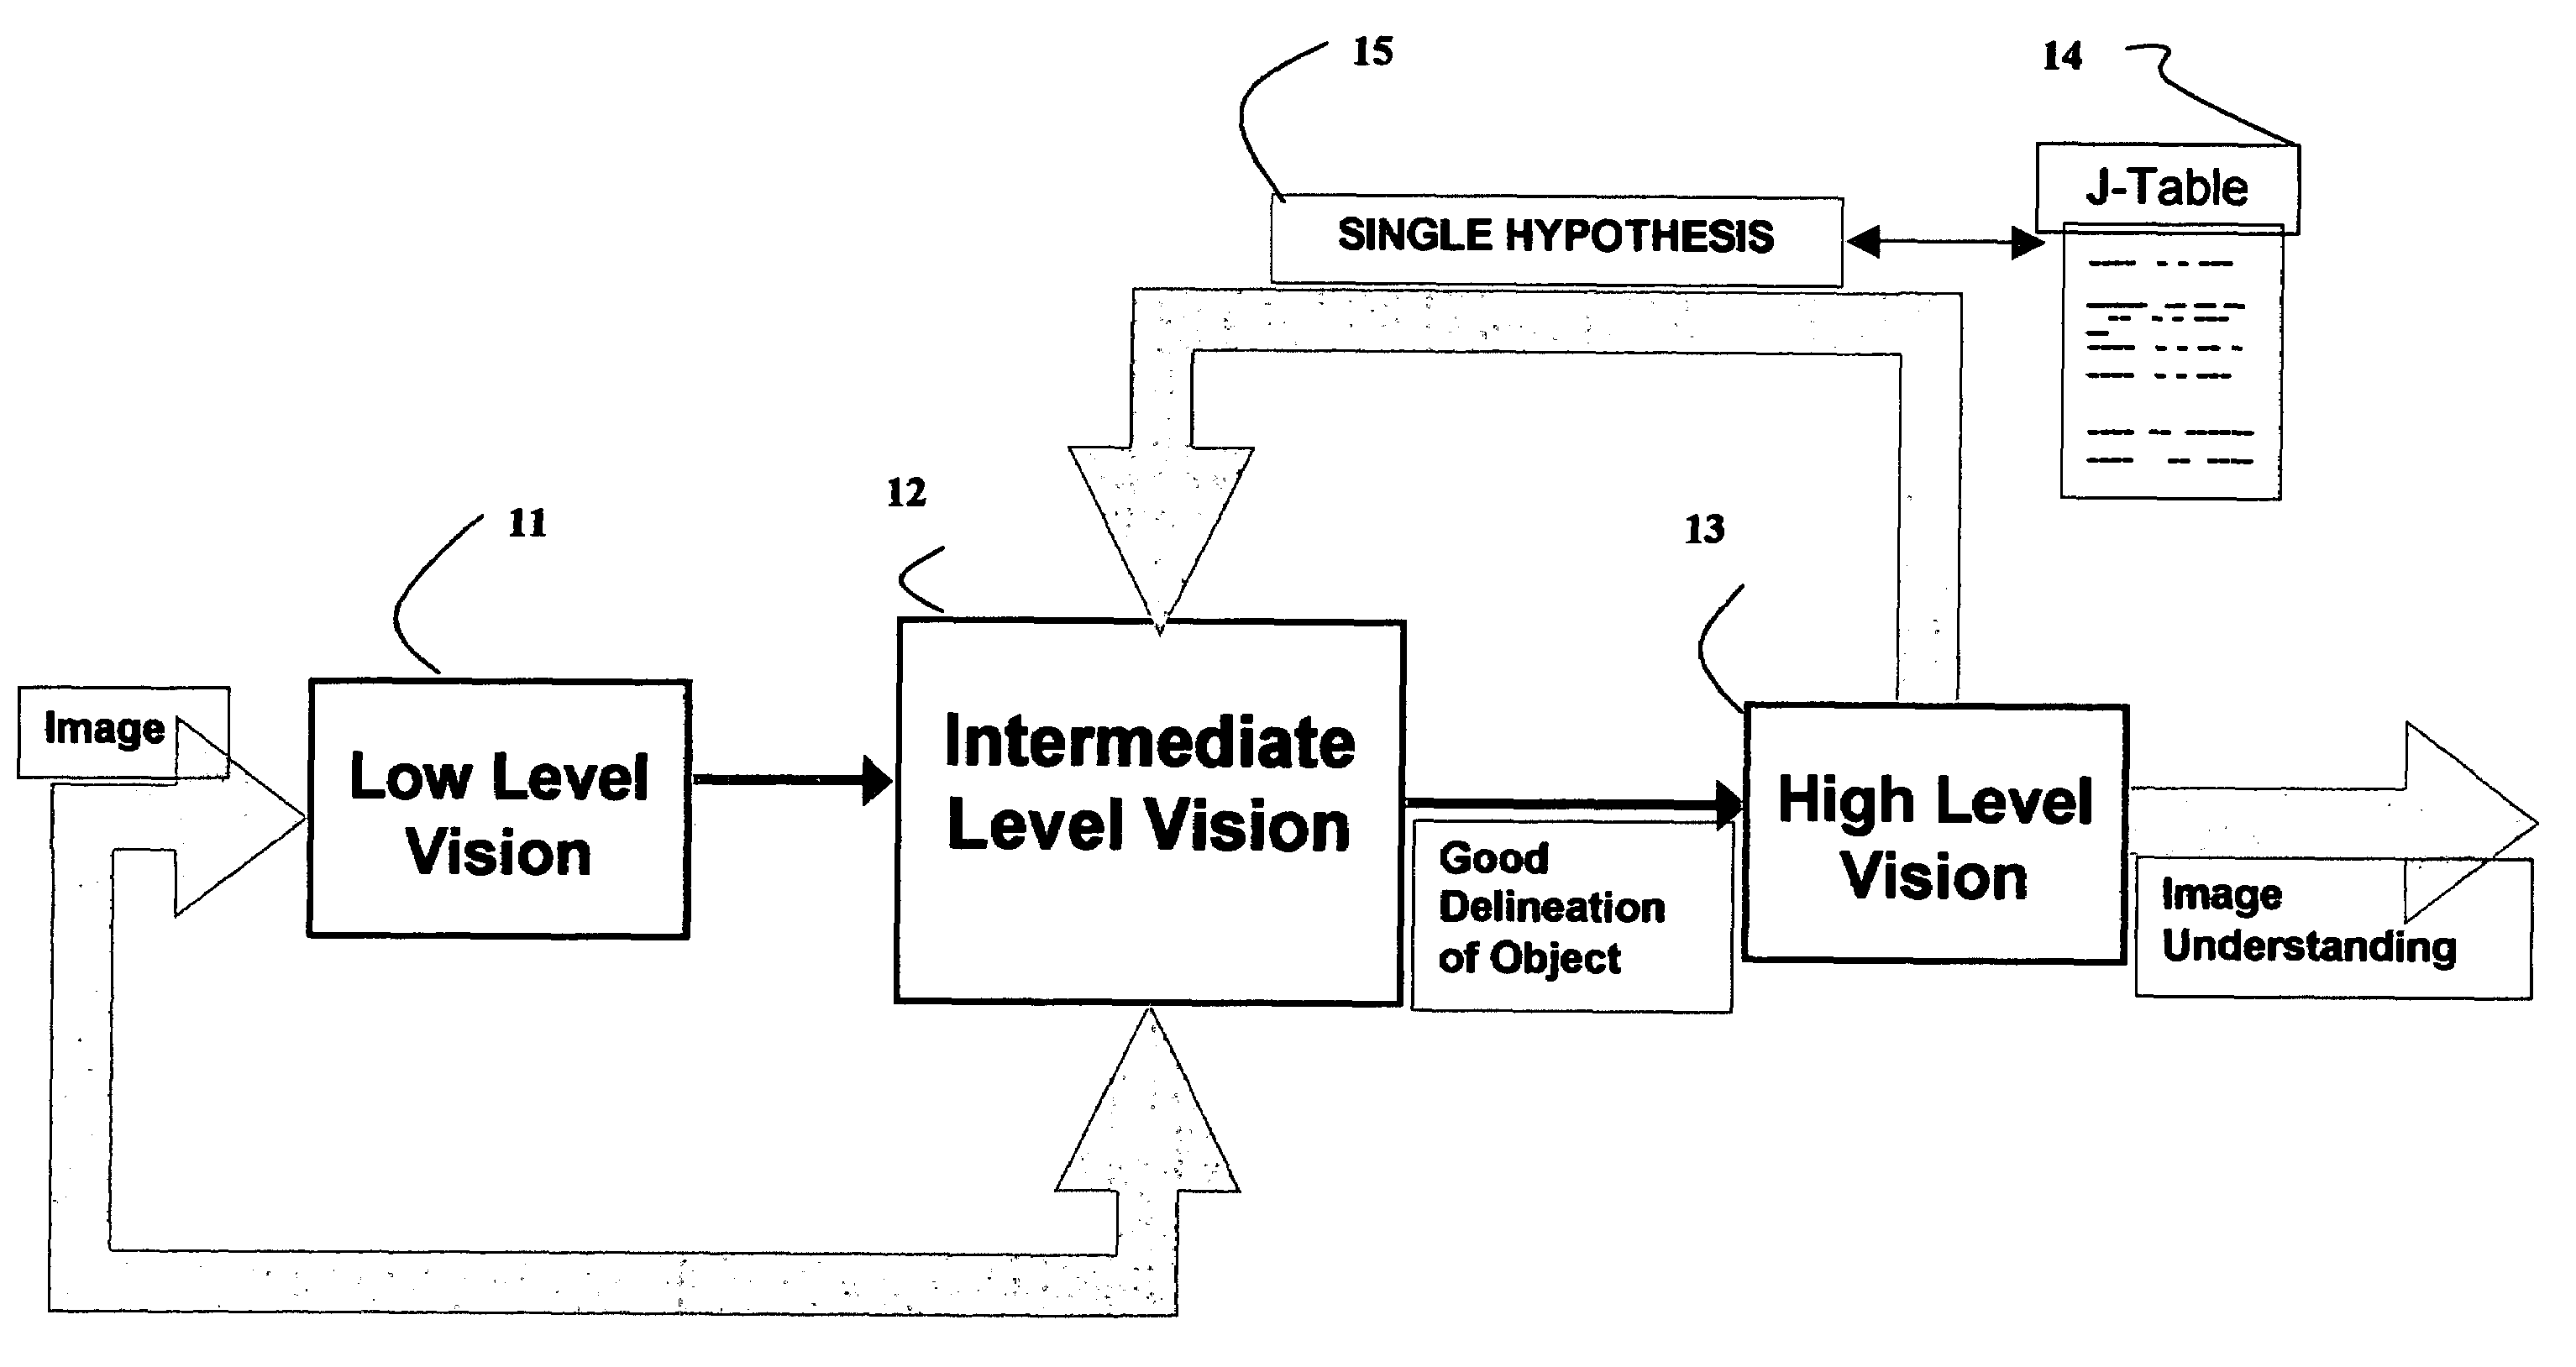 Hypothesis support mechanism for mid-level visual pattern recognition